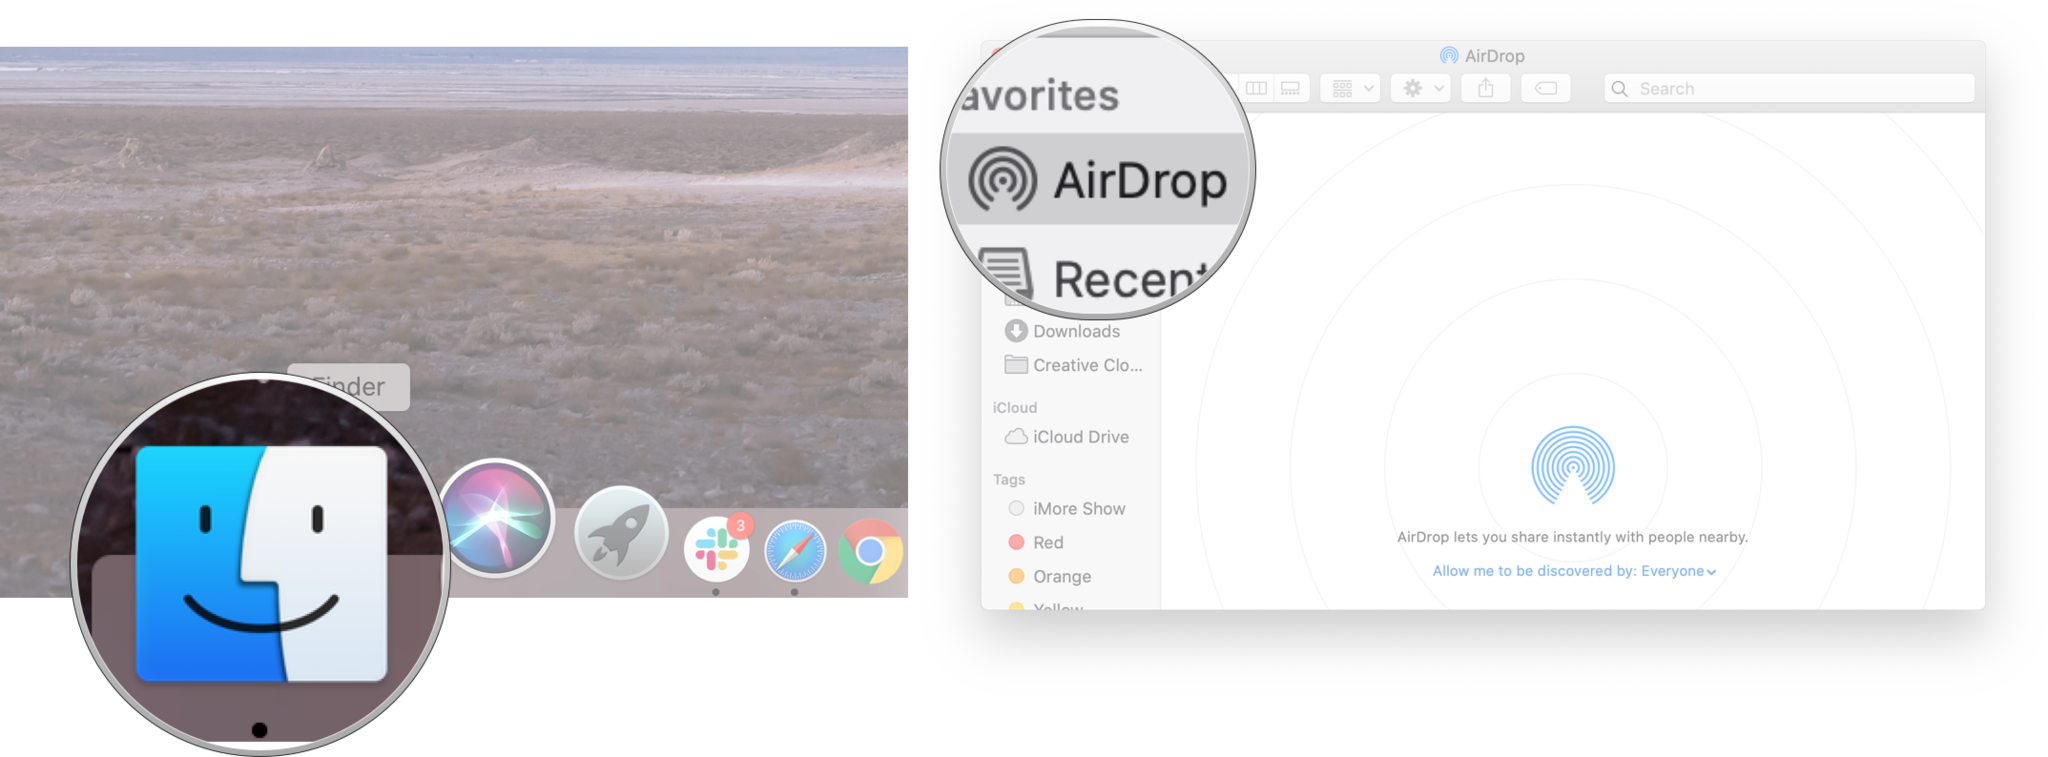 Set up AirDrop access on Mac: Launch Finder, and then click AirDrop.